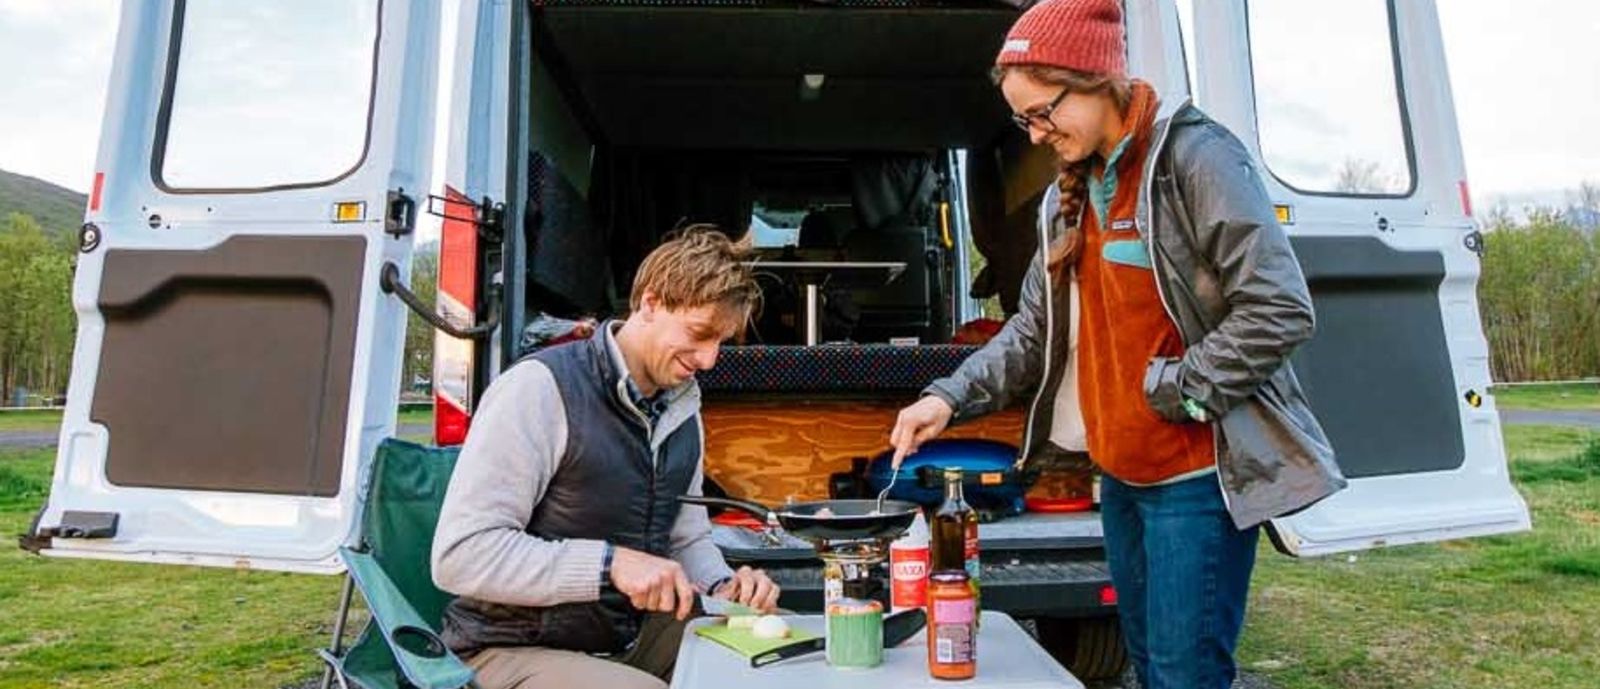 10 Tips For Cooking In An RV